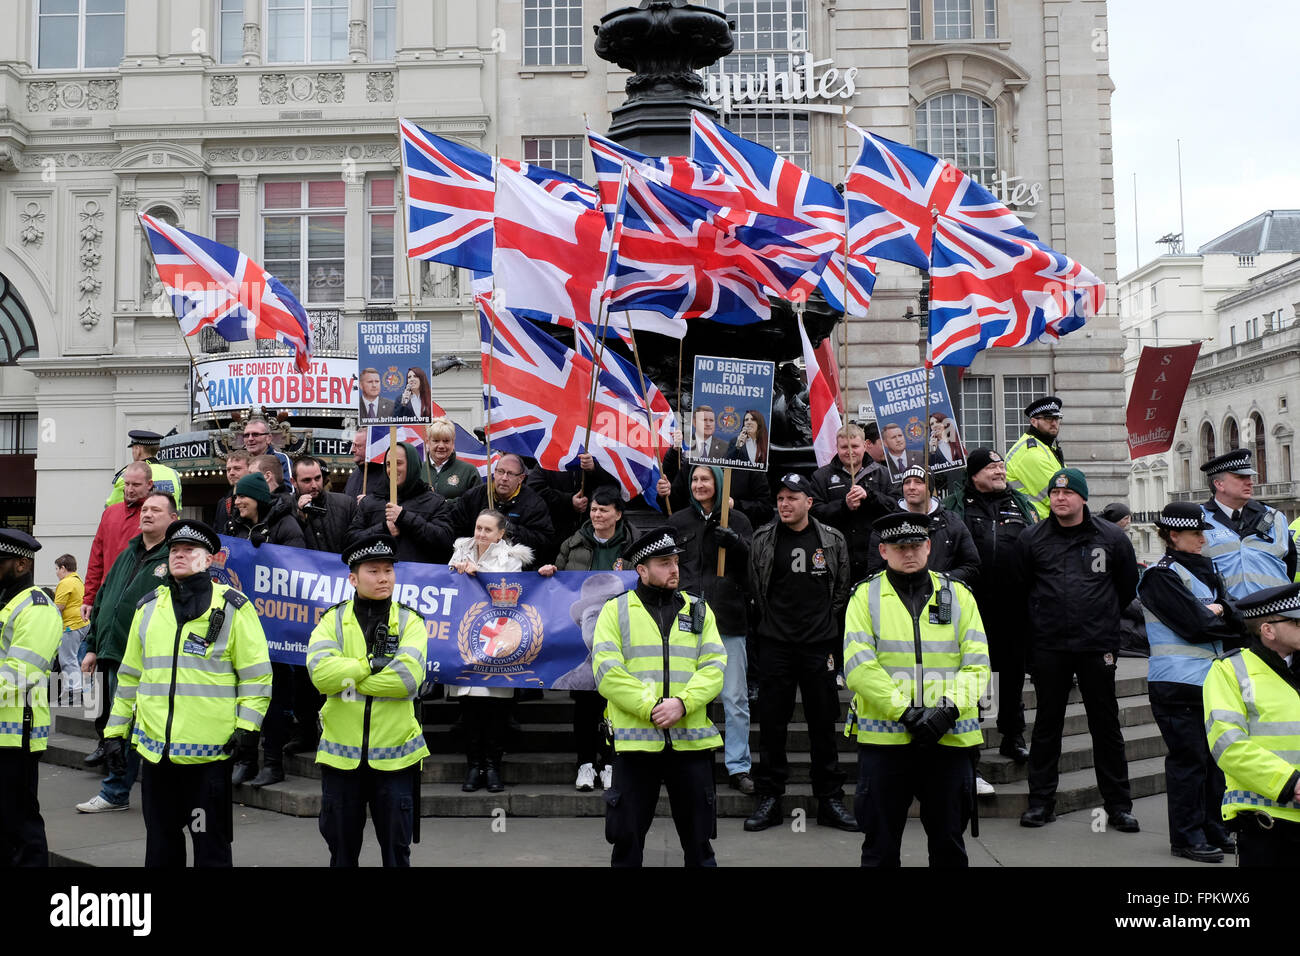 London, UK, 19th March 2016. The far-right group Britain first stage a counter- demonstration. Credit: Yanice Idir / Alamy Live News Stock Photo